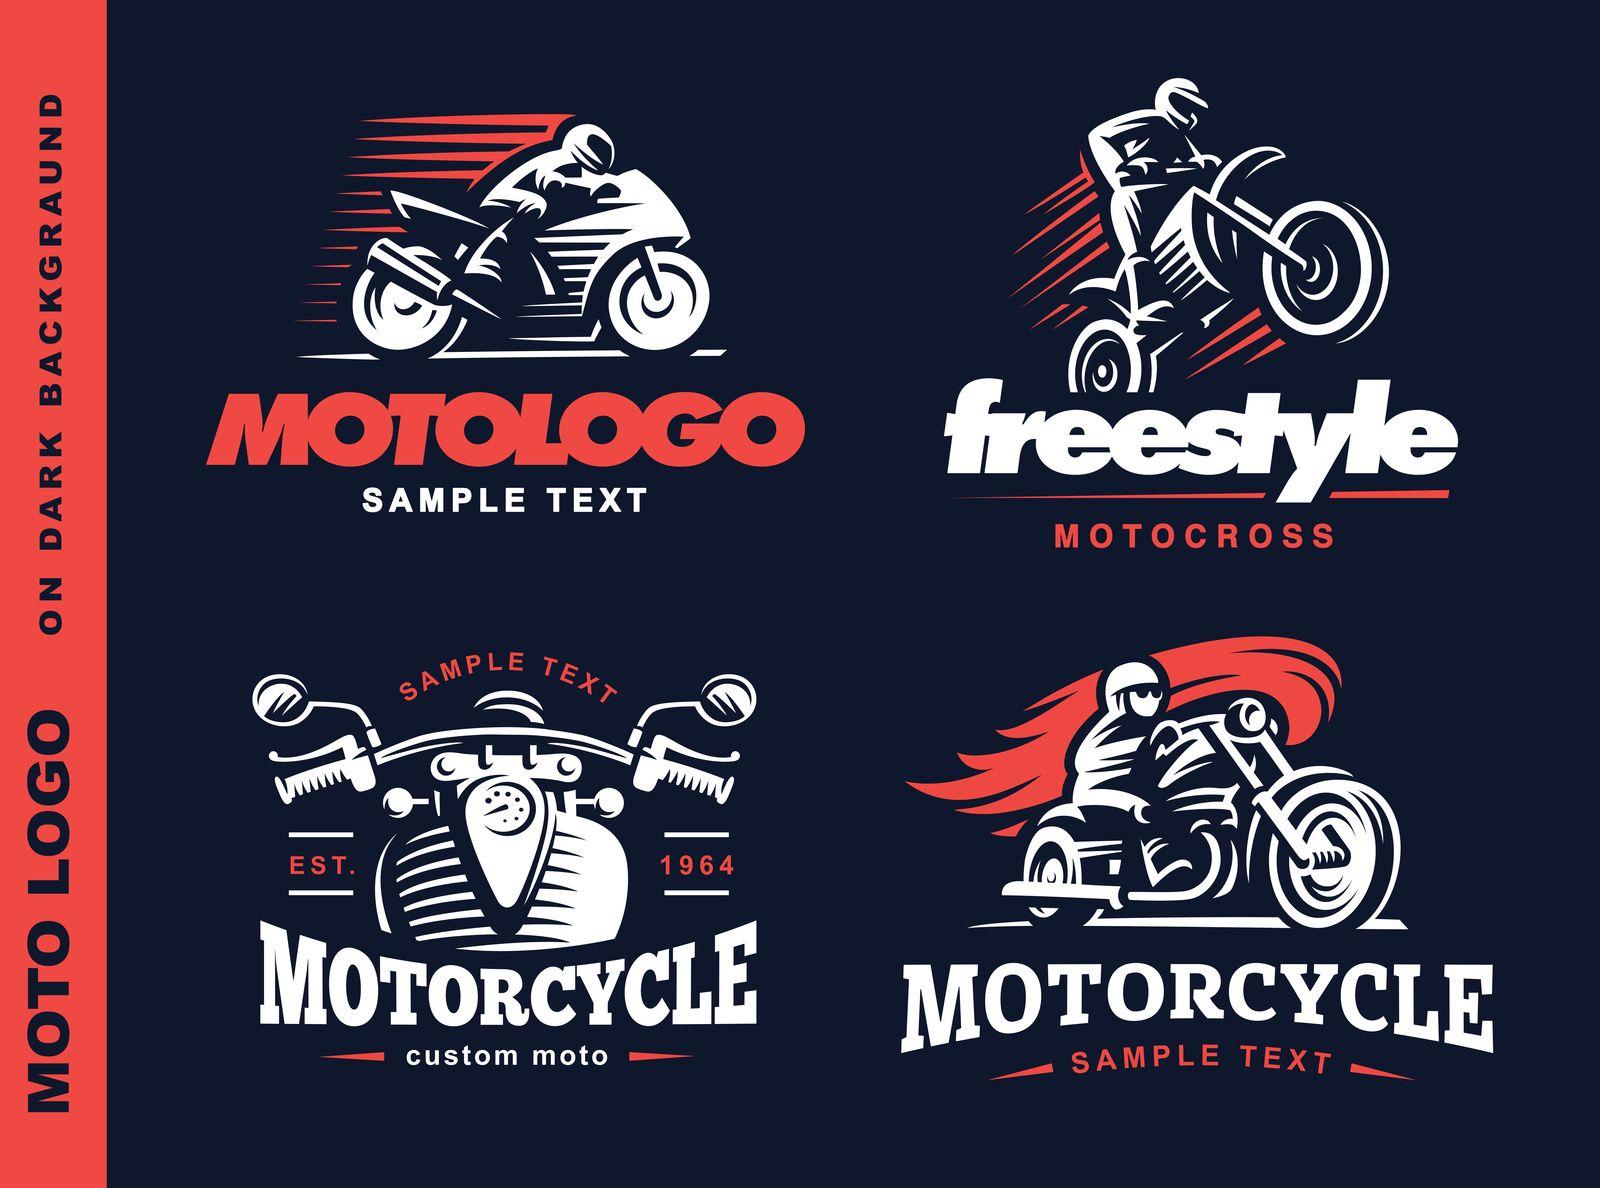 Motorcycle Logo - 5 Must-Know Facts About Famous Motorcycle Logos • Online Logo ...